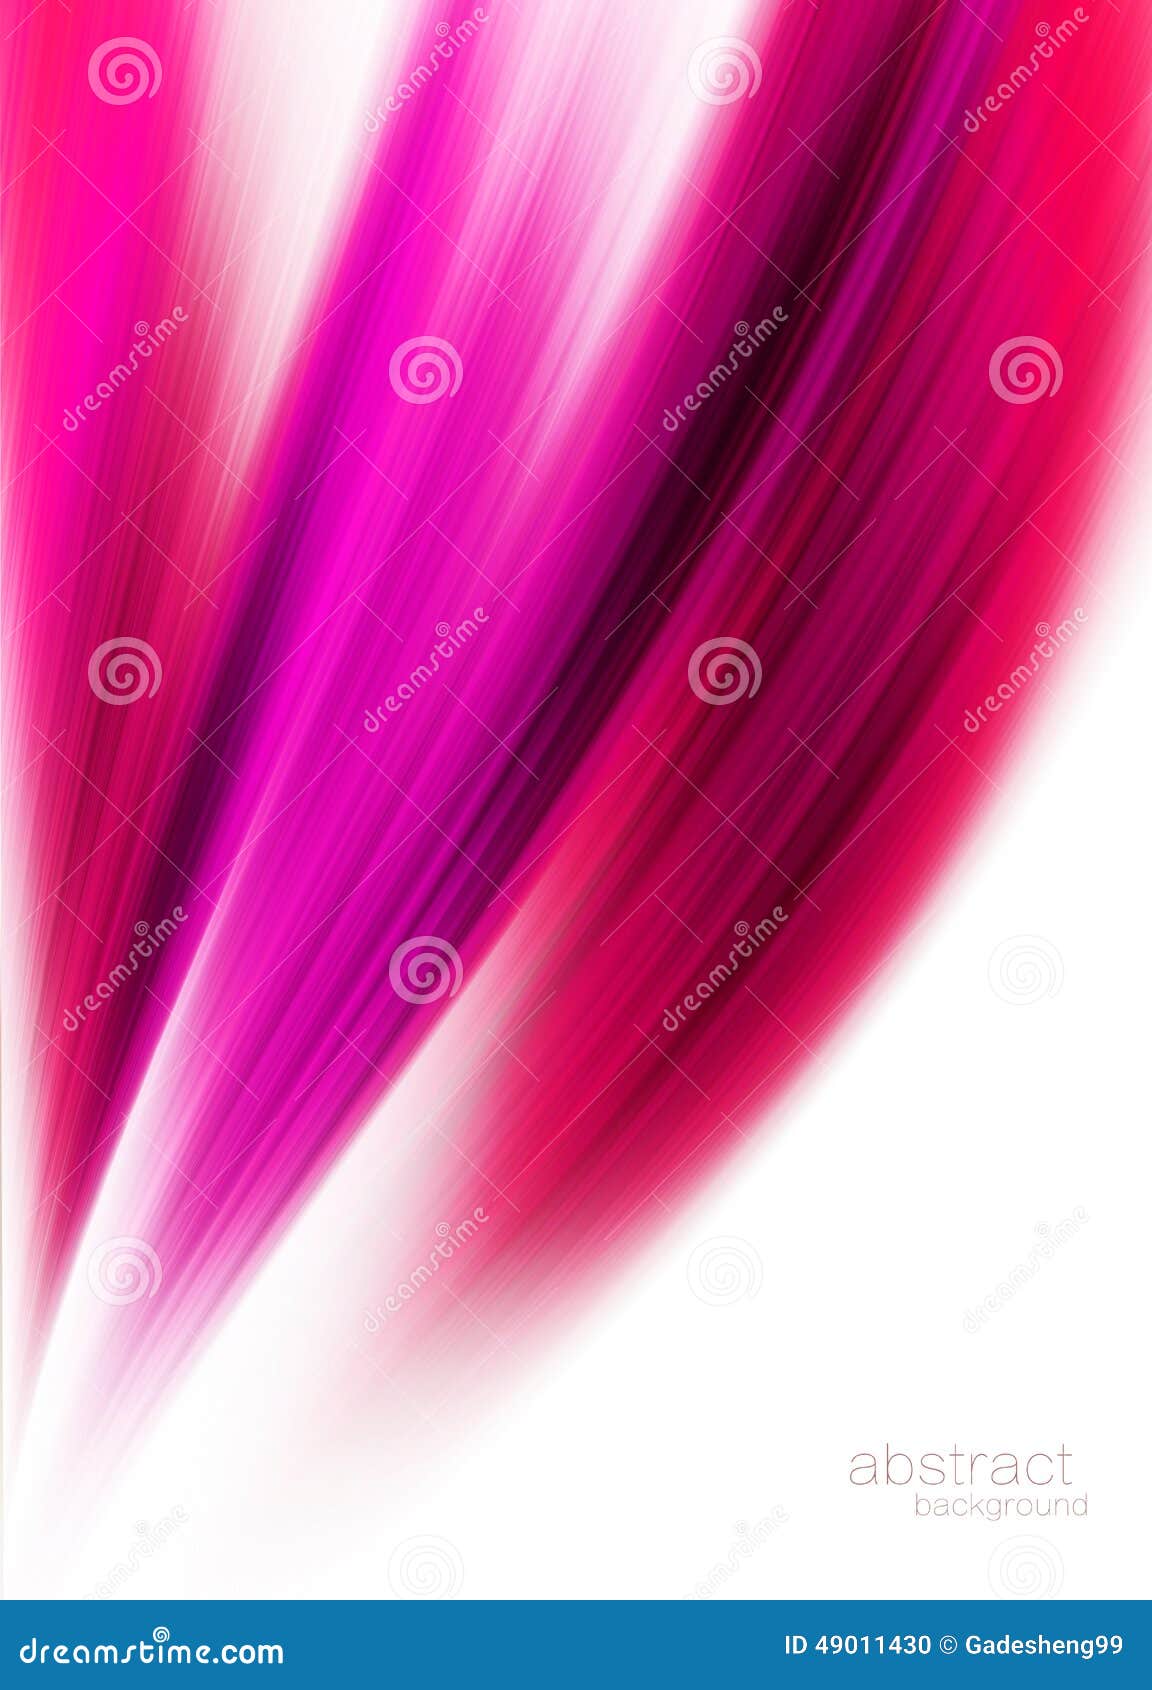 red purple advanced modern technology abstract background